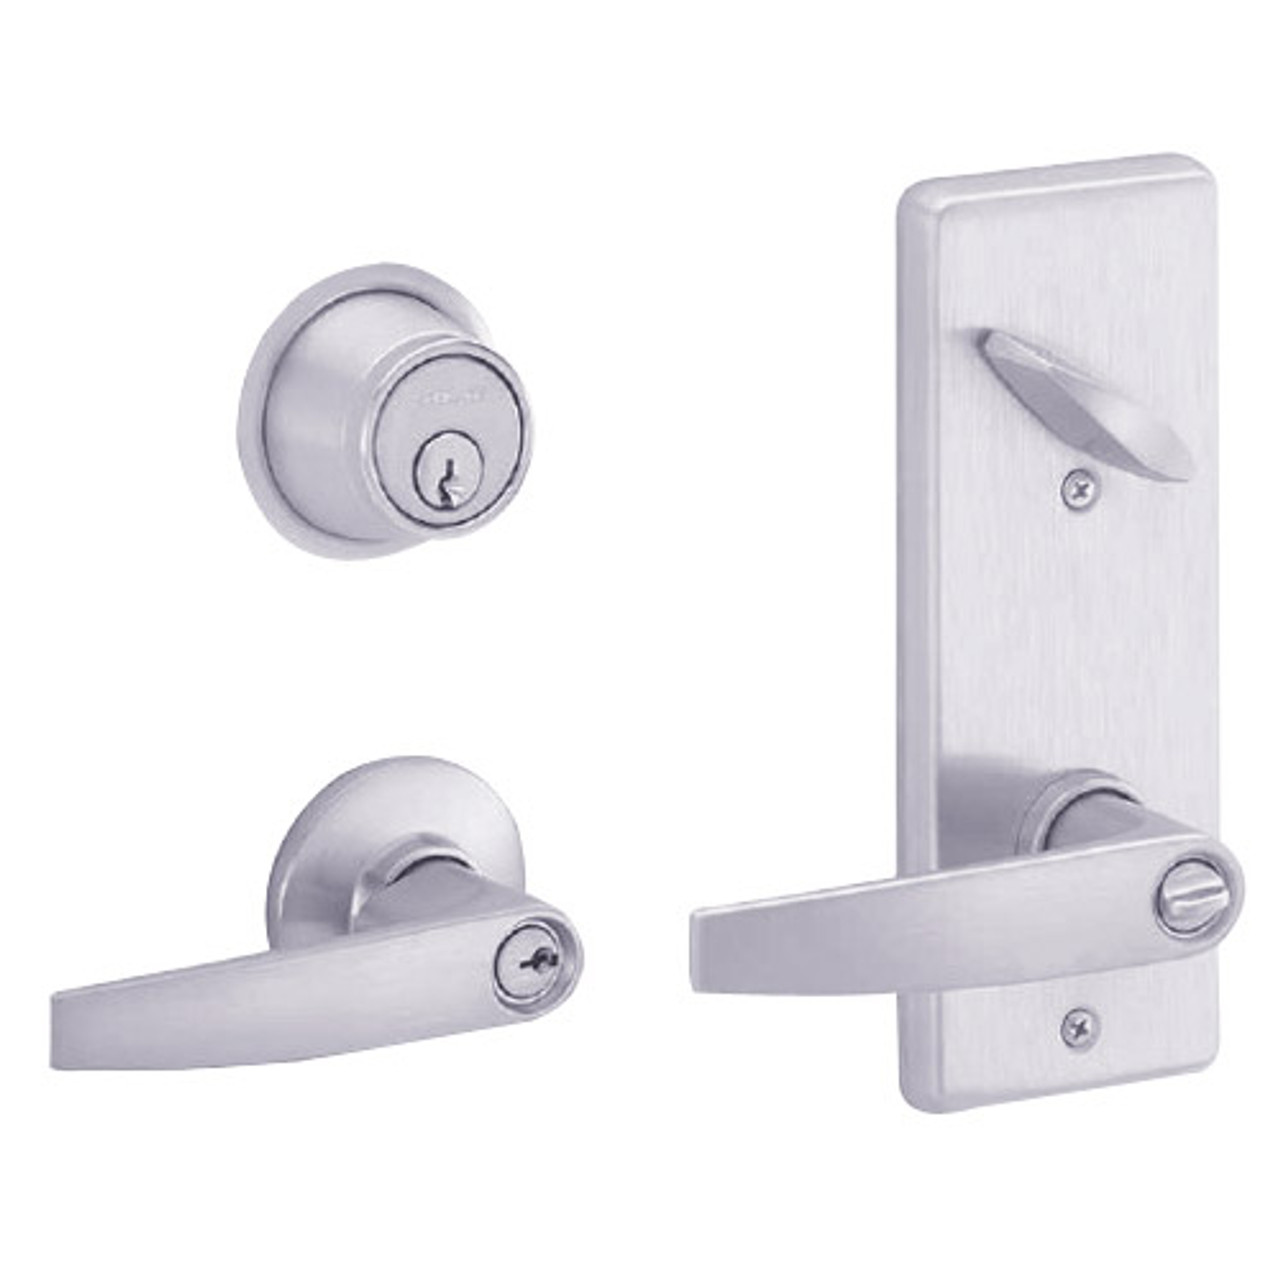 S251PD-JUP-626 Schlage S251PD Jupiter Style Interconnected Lock in Satin Chromium Plated